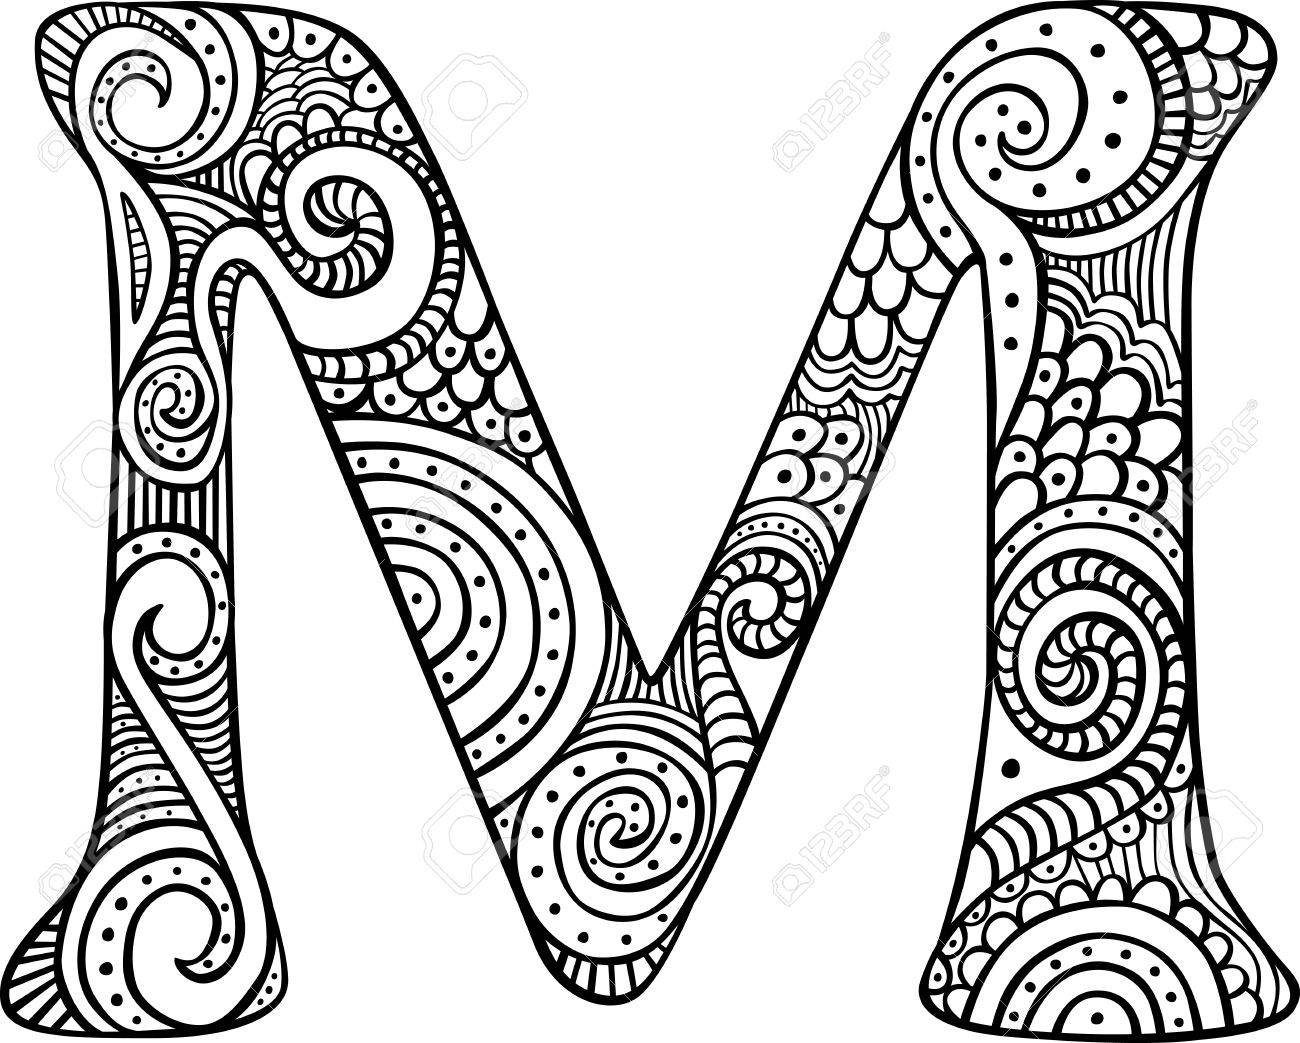 Hand drawn capital letter m in black